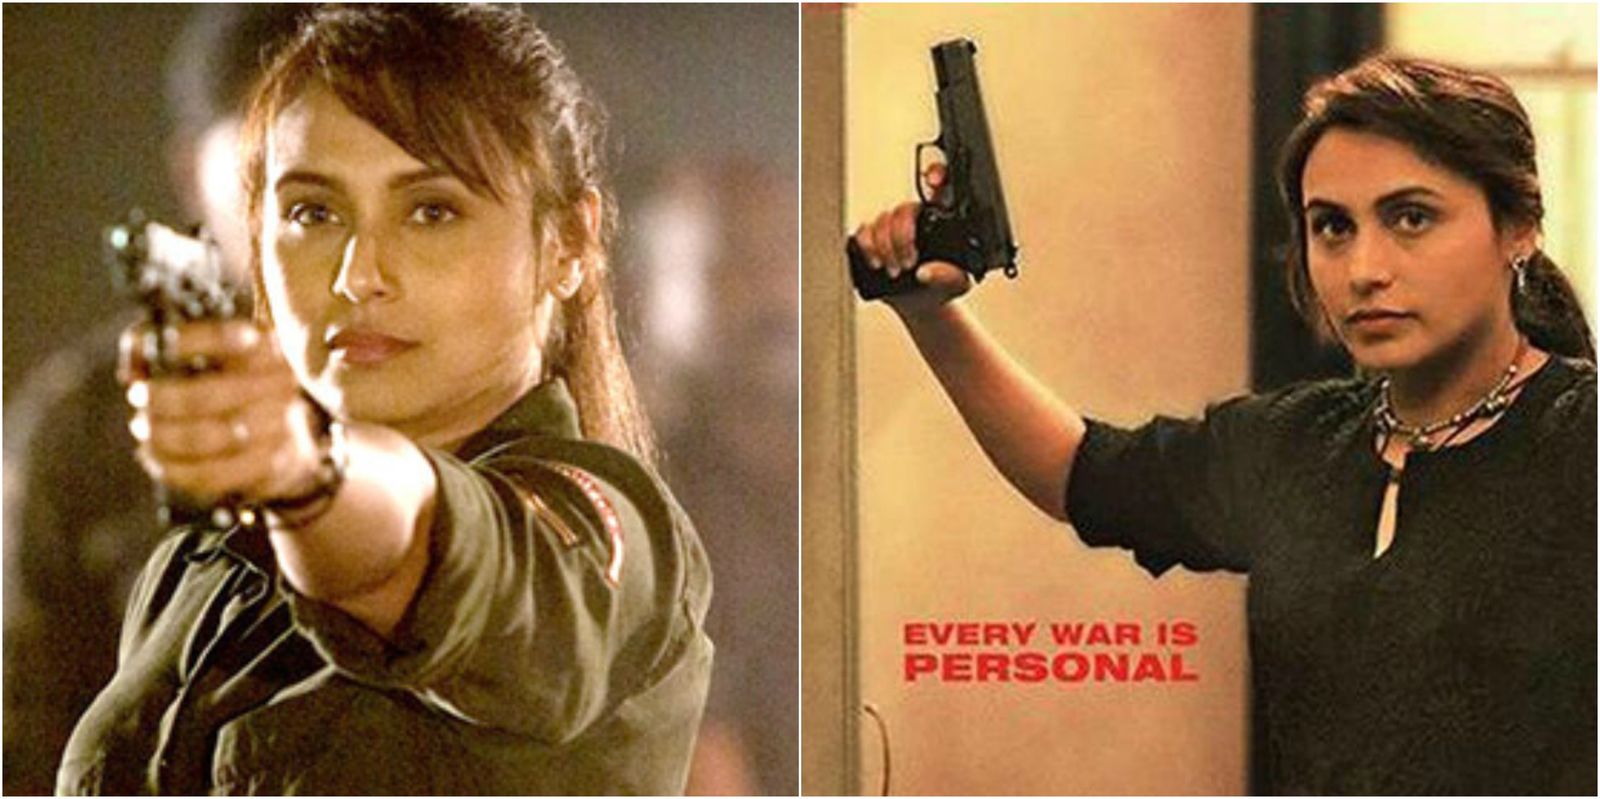 Rani Mukerji’s First Look From Mardaani 2 Is Here And It Is Reminding Us Of Ajay Devgn From Gangaajal